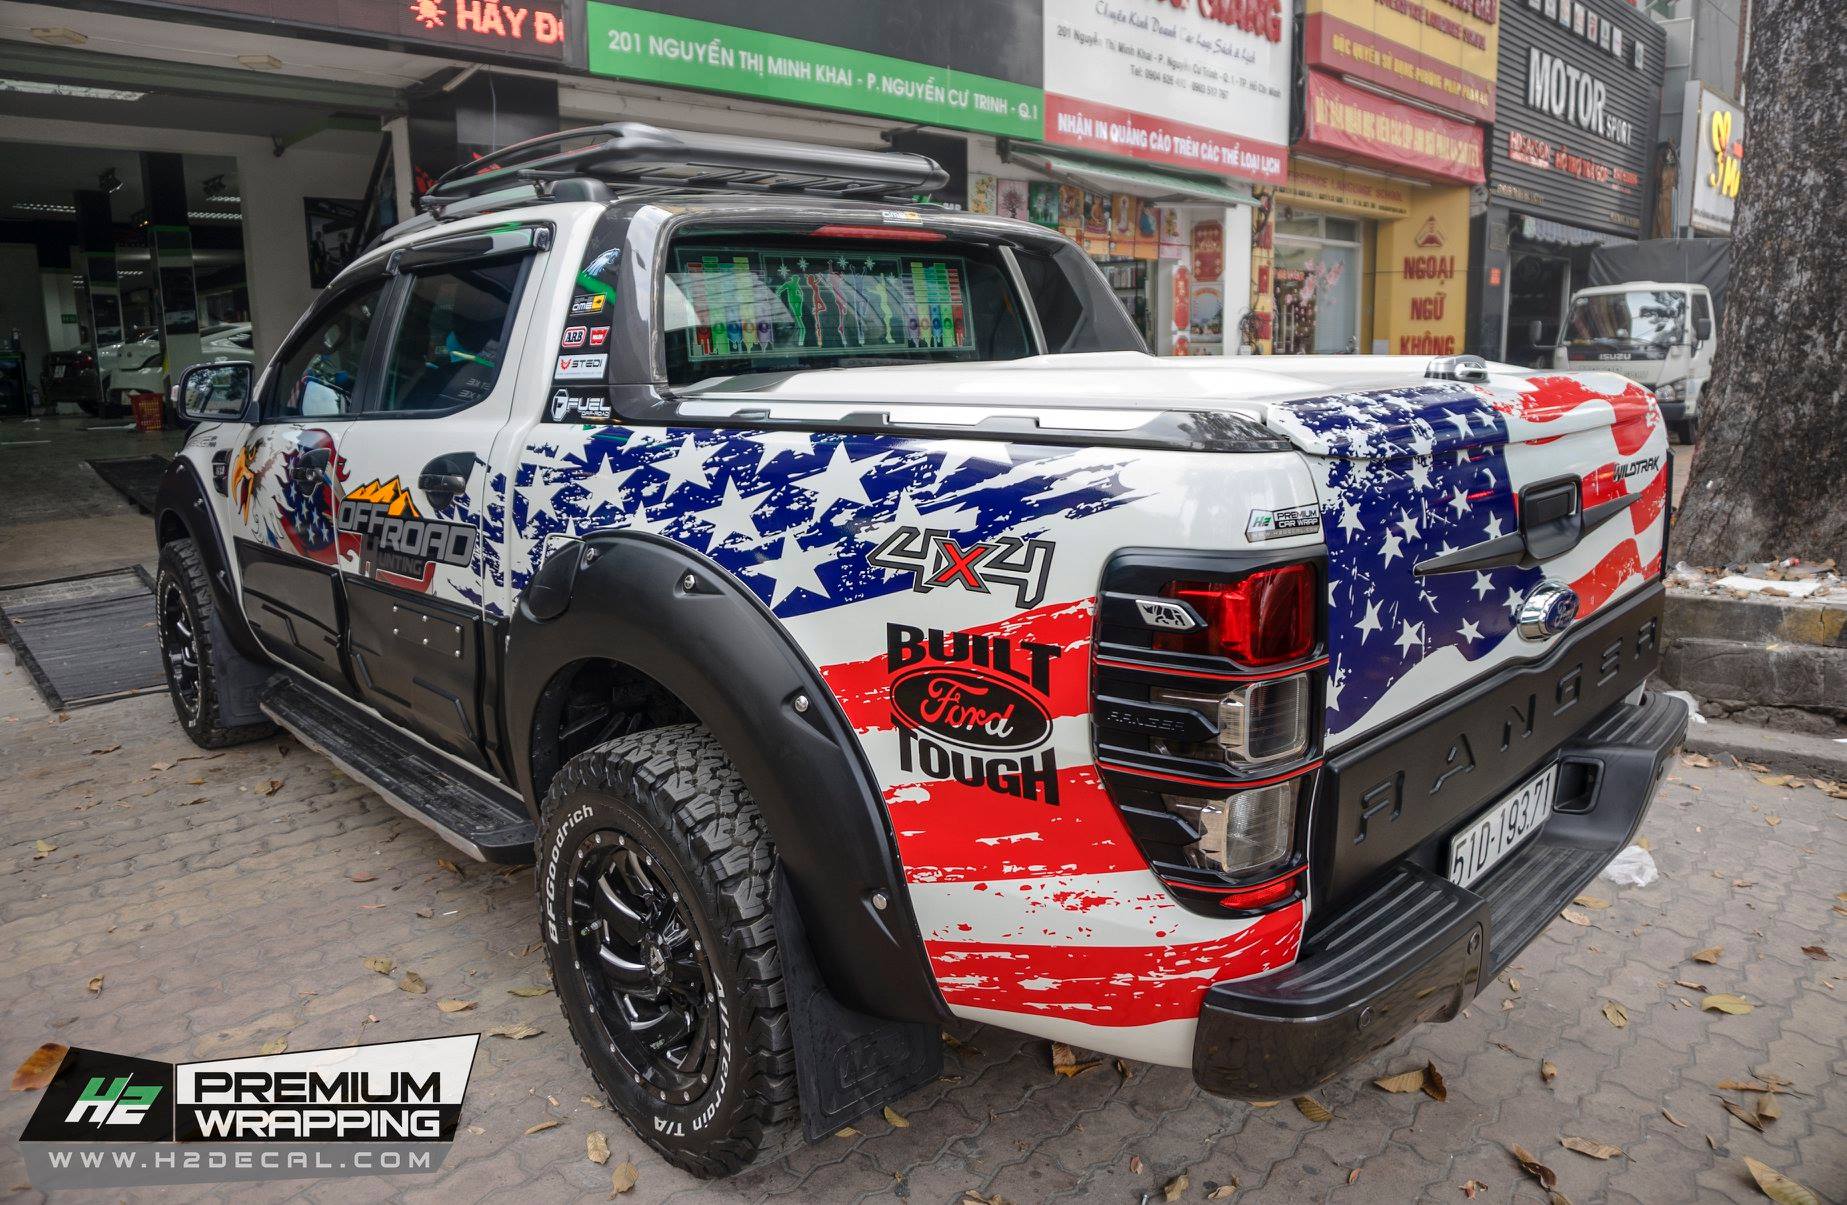 Car Stickers Both Sides Car Head Tail Decals Vinyl KK Decoration Auto Car  Styling Accessories For Ford RANGER Raptor F150 Pickup291u From King116,  $115.58